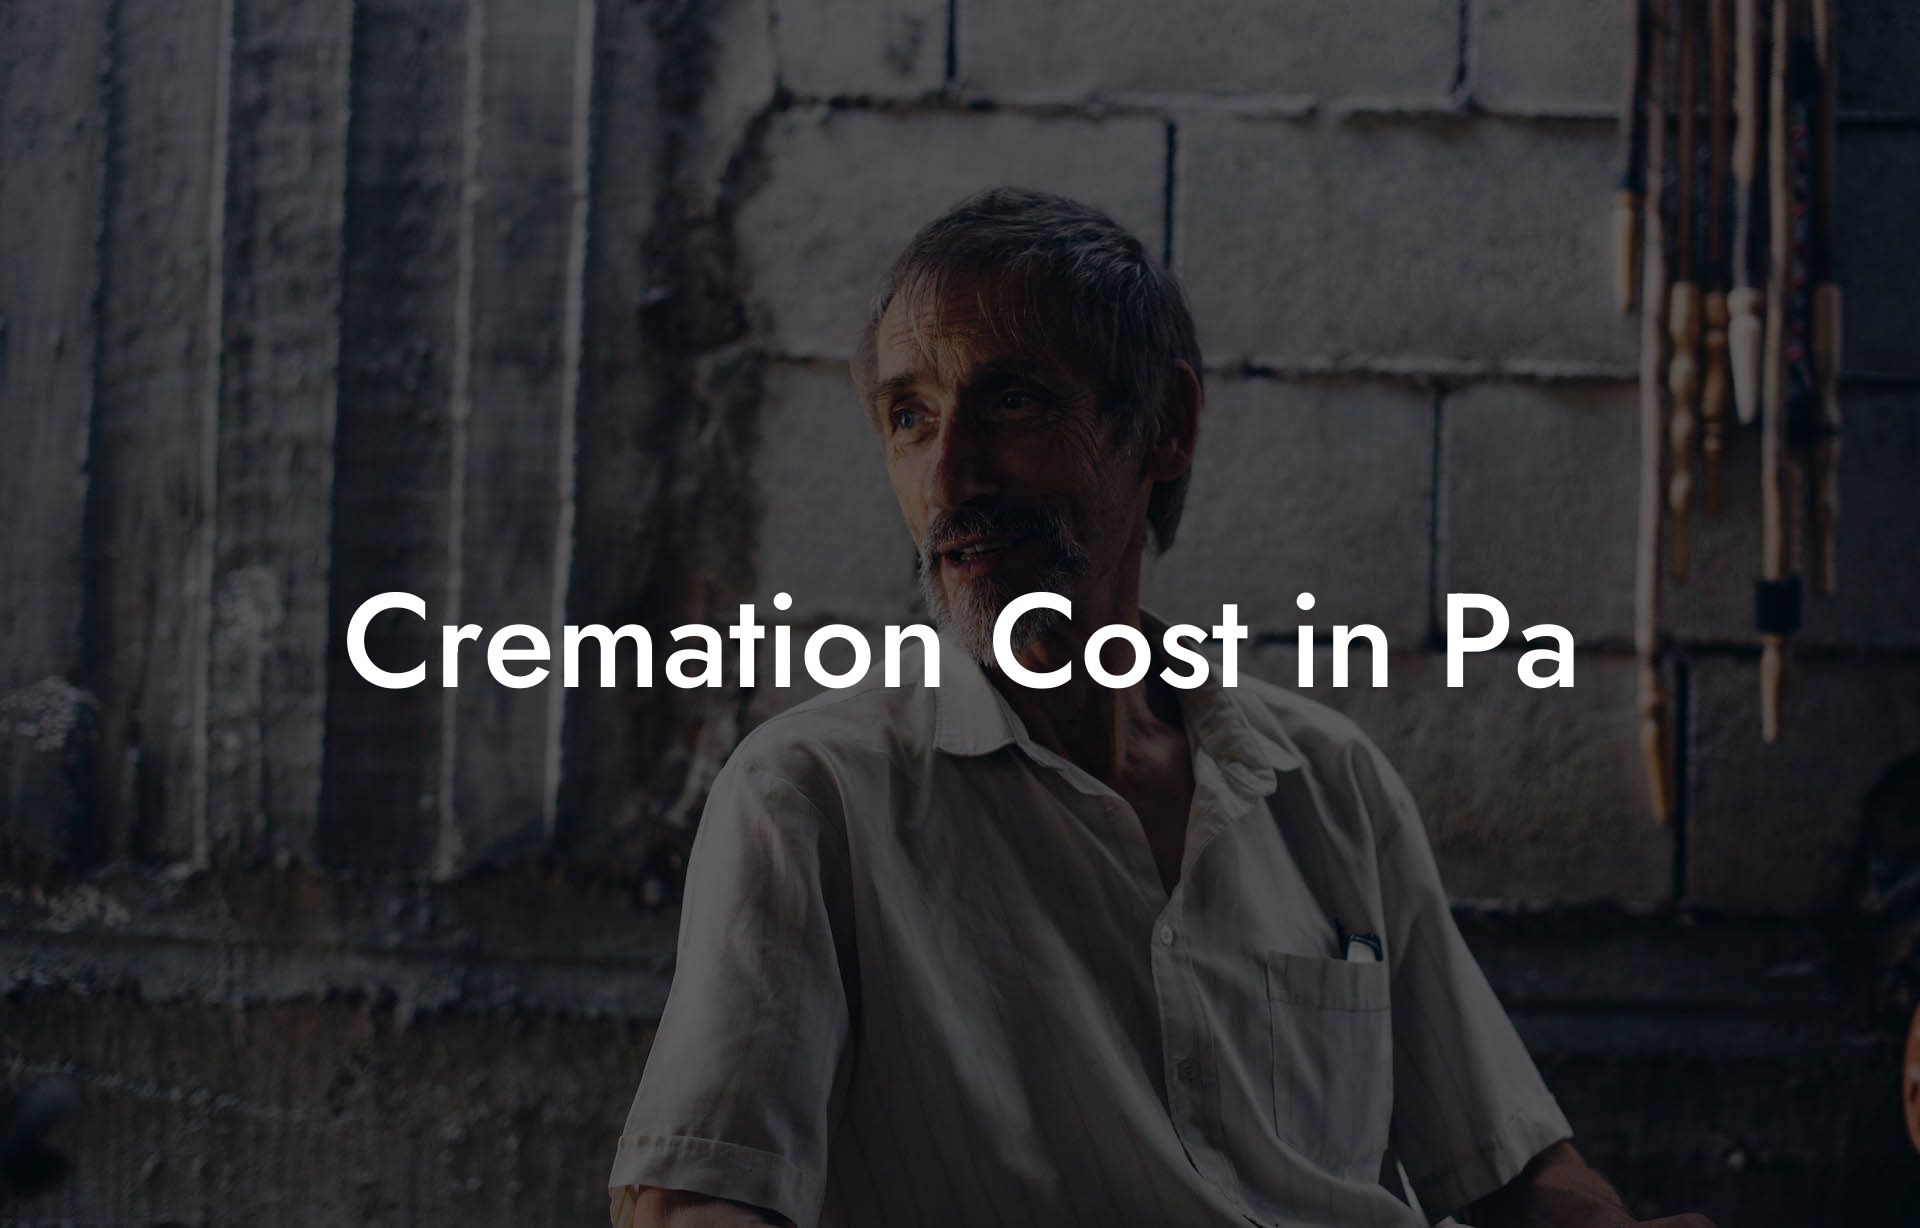 Cremation Cost in Pa